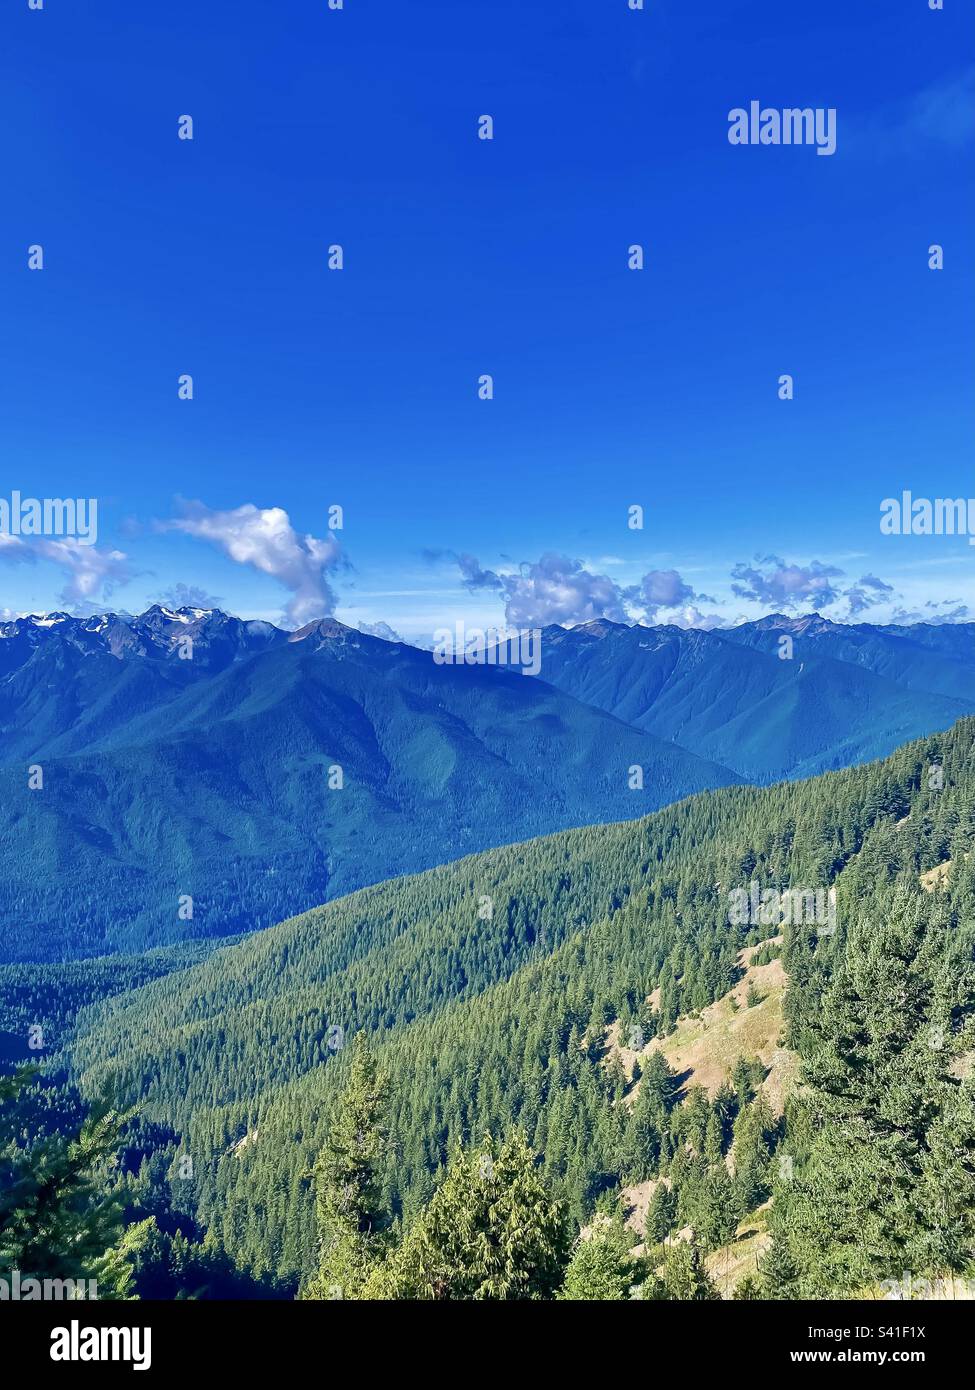 Mountains and green trees. Clear blue skies. Stock Photo